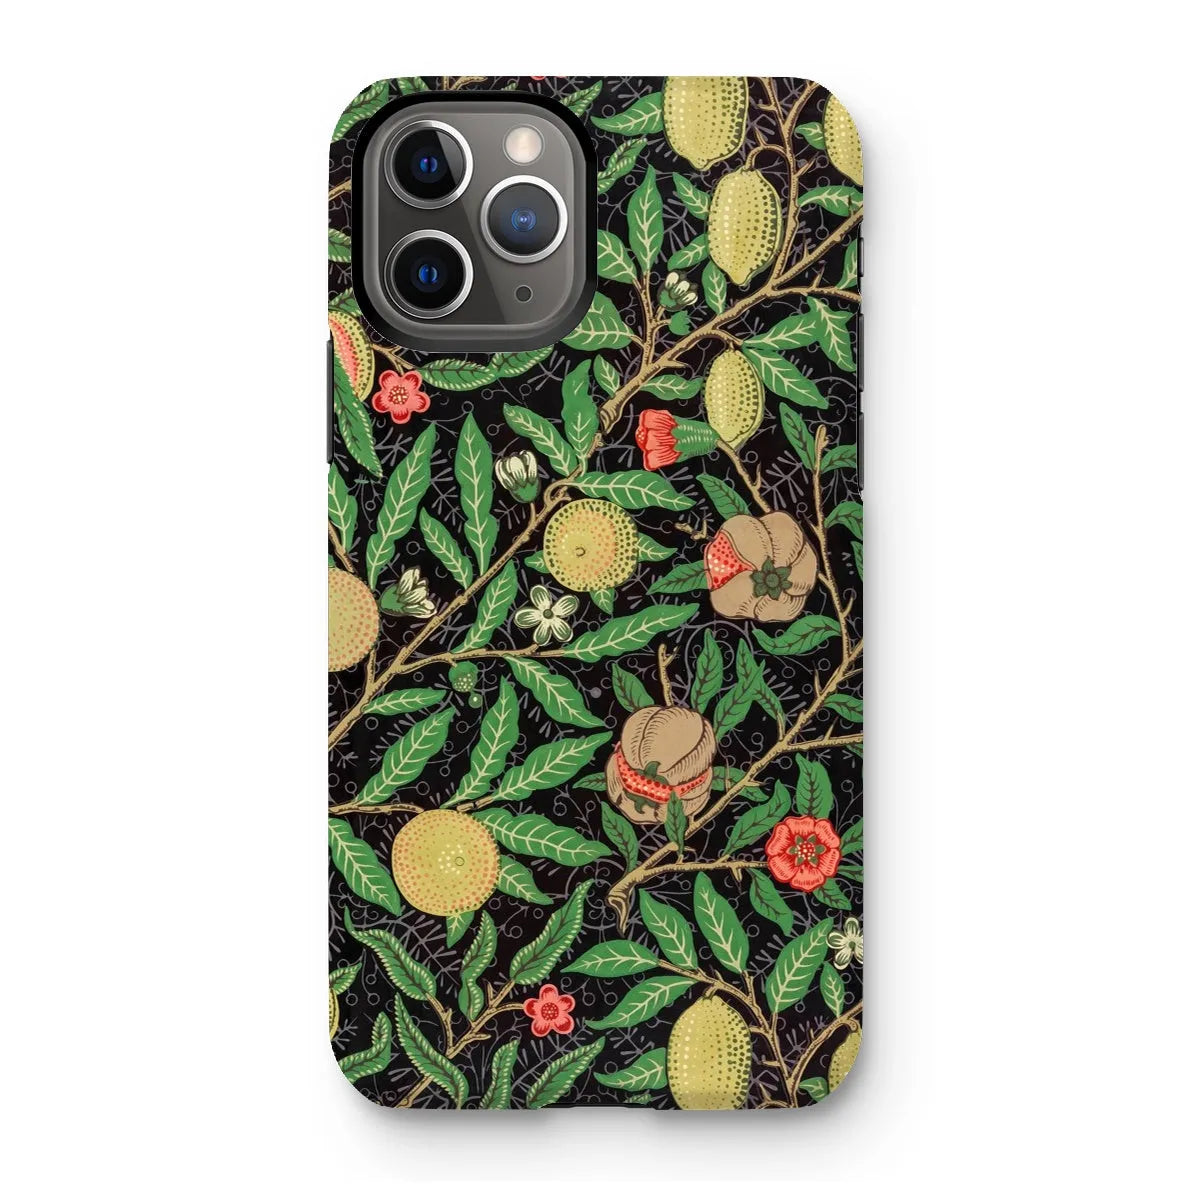 Four Fruits Too Aesthetic Pattern Phone Case - William Morris - Iphone 11 Pro / Matte - Mobile Phone Cases - Aesthetic